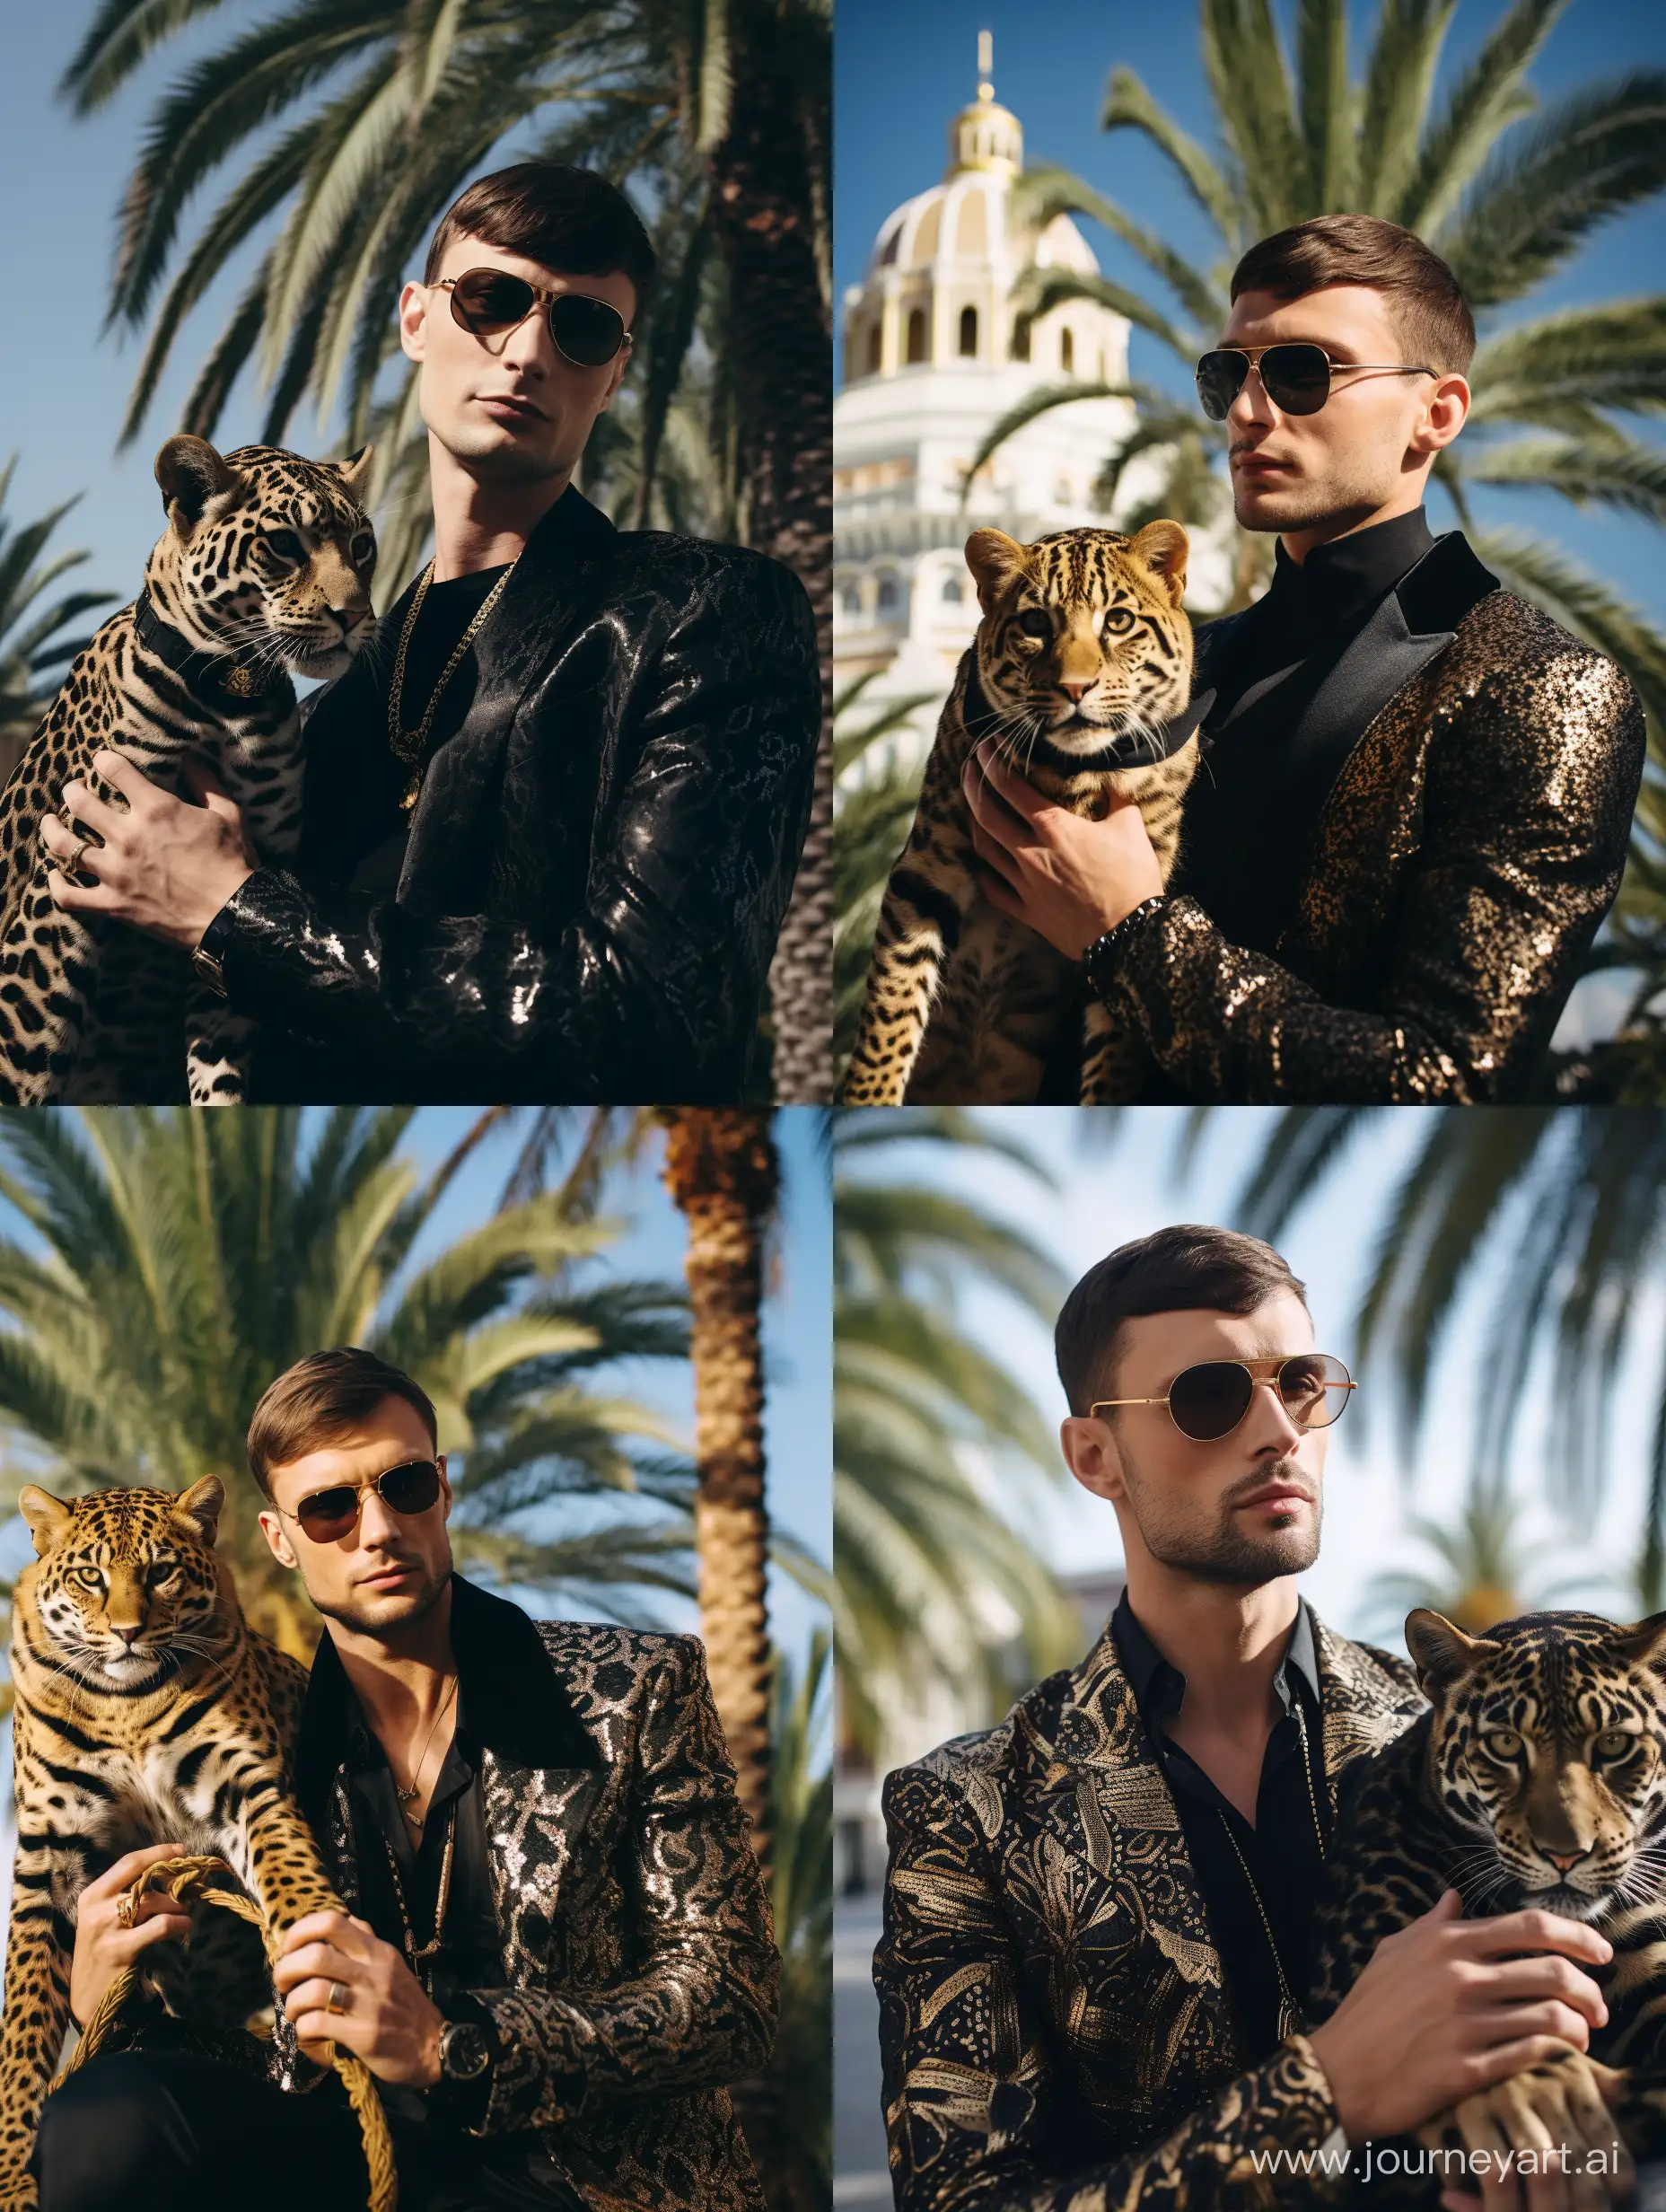 photo of a slender 20-year-old handsome brown-haired Russian man with a fashionable haircut, in a leopard suit with a black satin shirt, holding a black panther in a gold collar on a leash, surreal, bentley, real big glow, mansion in Monaco, aesthetics of old money, fashion, cloudy day, palm tree - ar 2:3